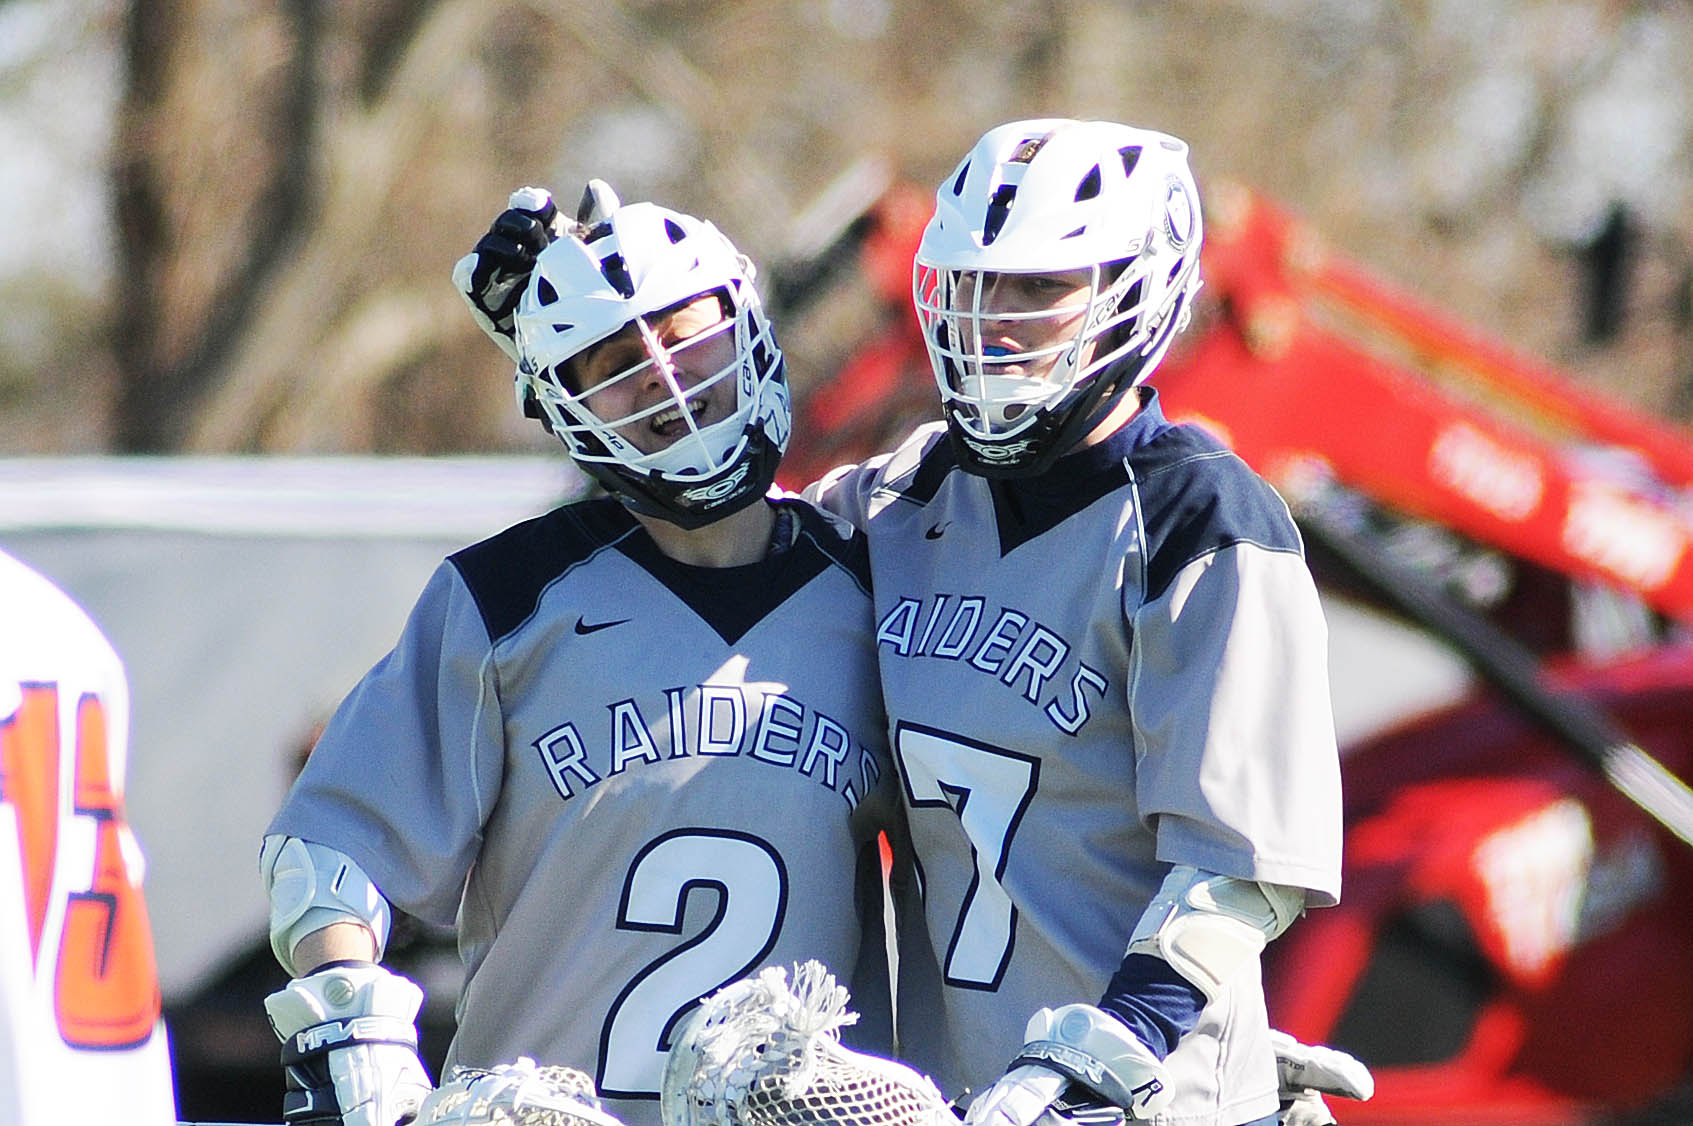 Men's Lacrosse: Raiders were just too much for the Bulldogs, 24-10